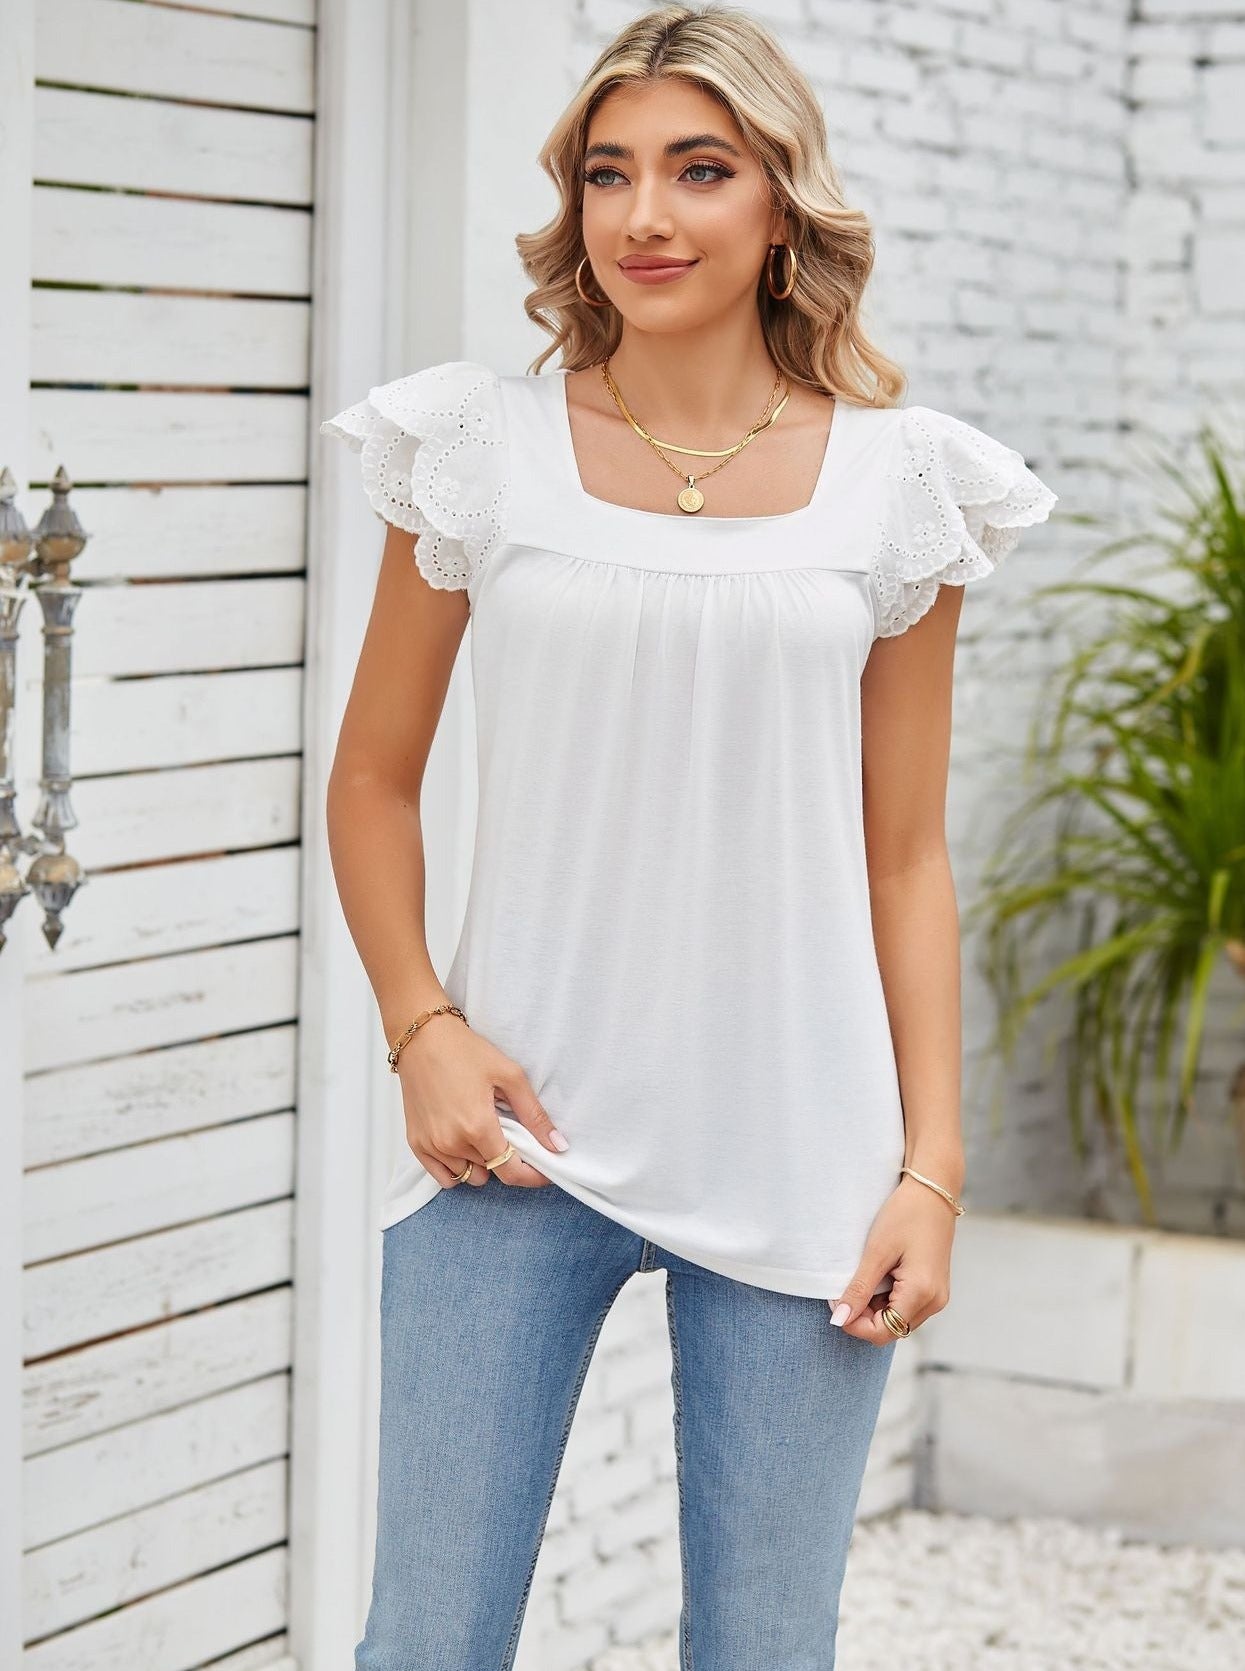 White Lace Stitching Square Collar Petal Short-Sleeved Shirt